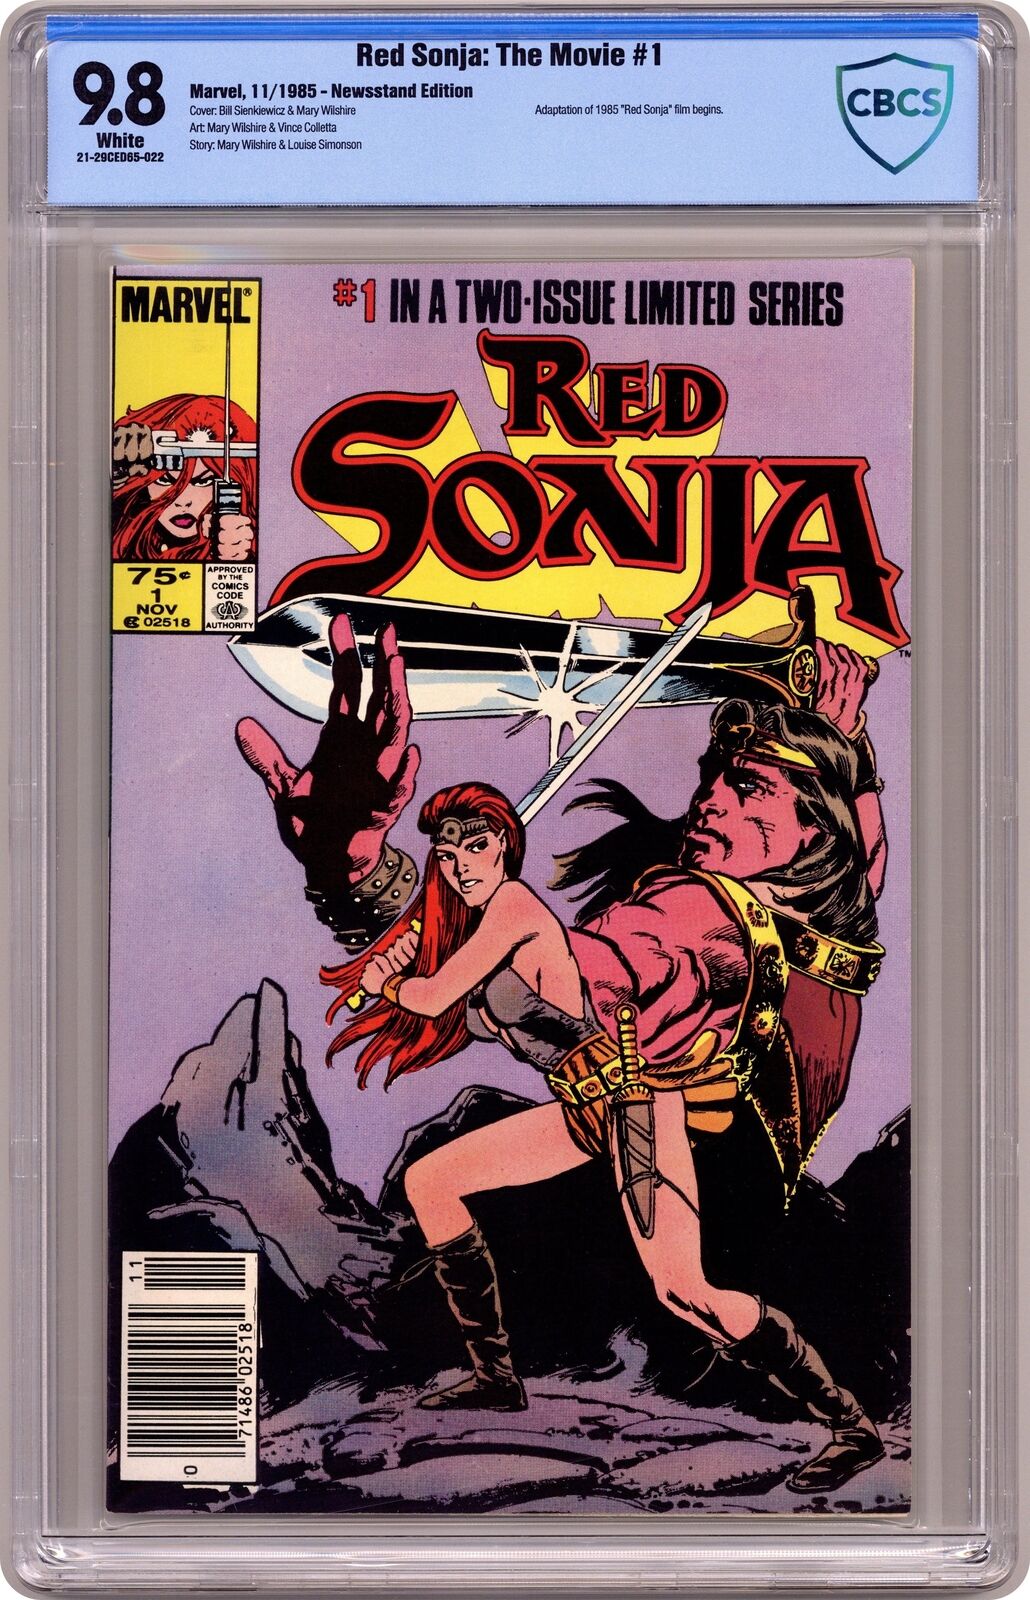 Red Sonja the Movie #1 CBCS 9.8 Newsstand 1985 21-29CED65-022